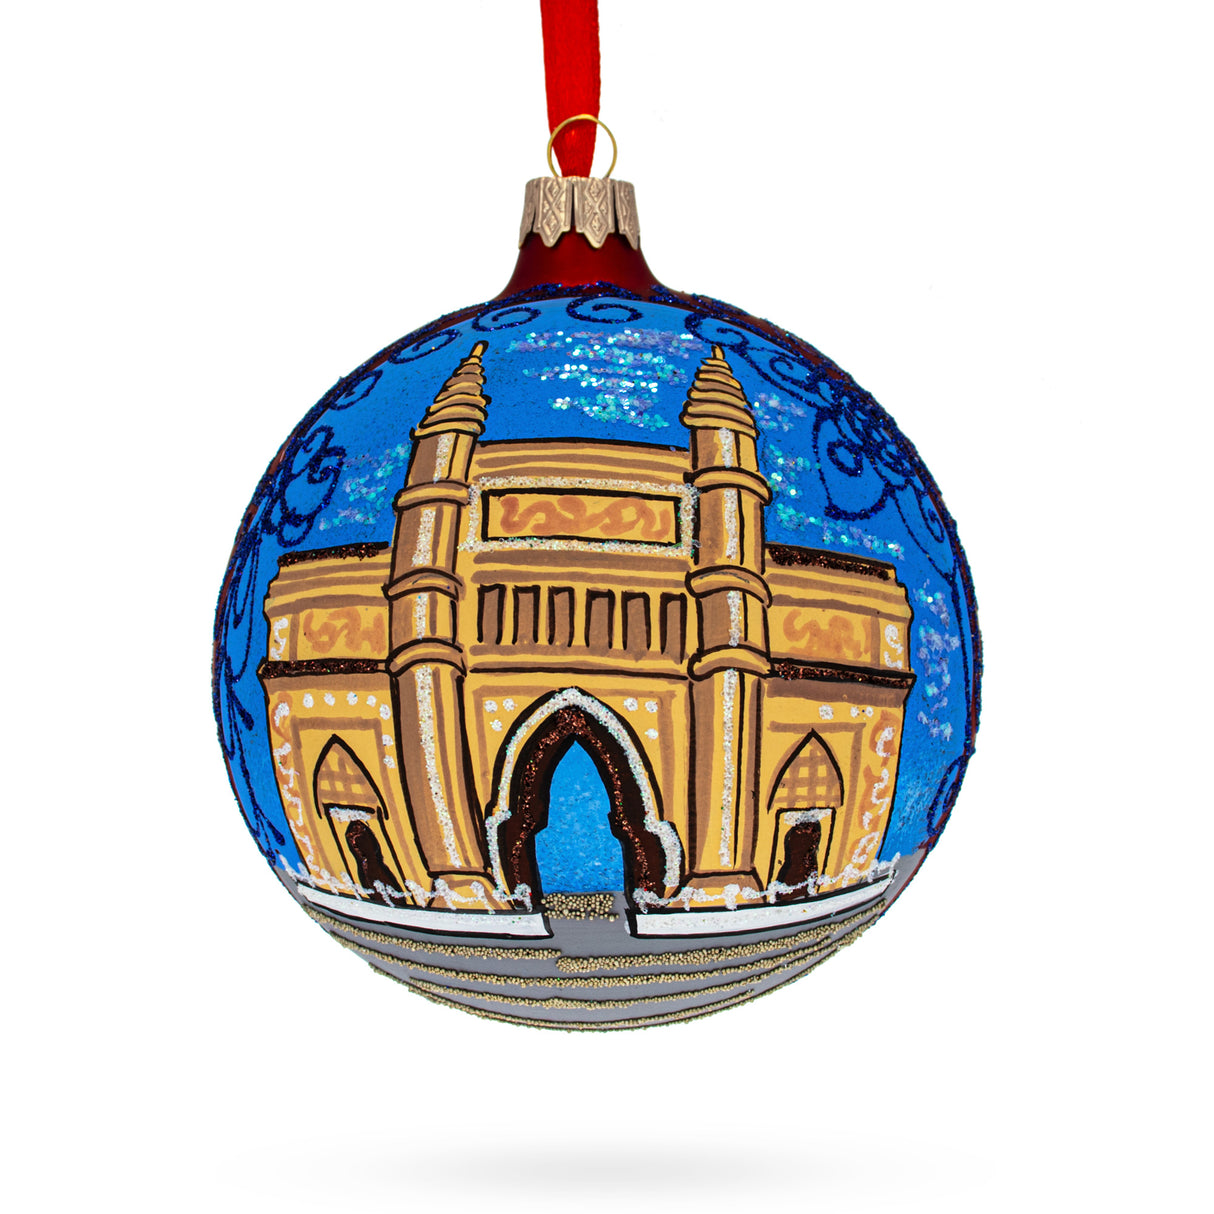 Glass Gateway of India, Mumbai Glass Ball Christmas Ornament 4 Inches in Blue color Round